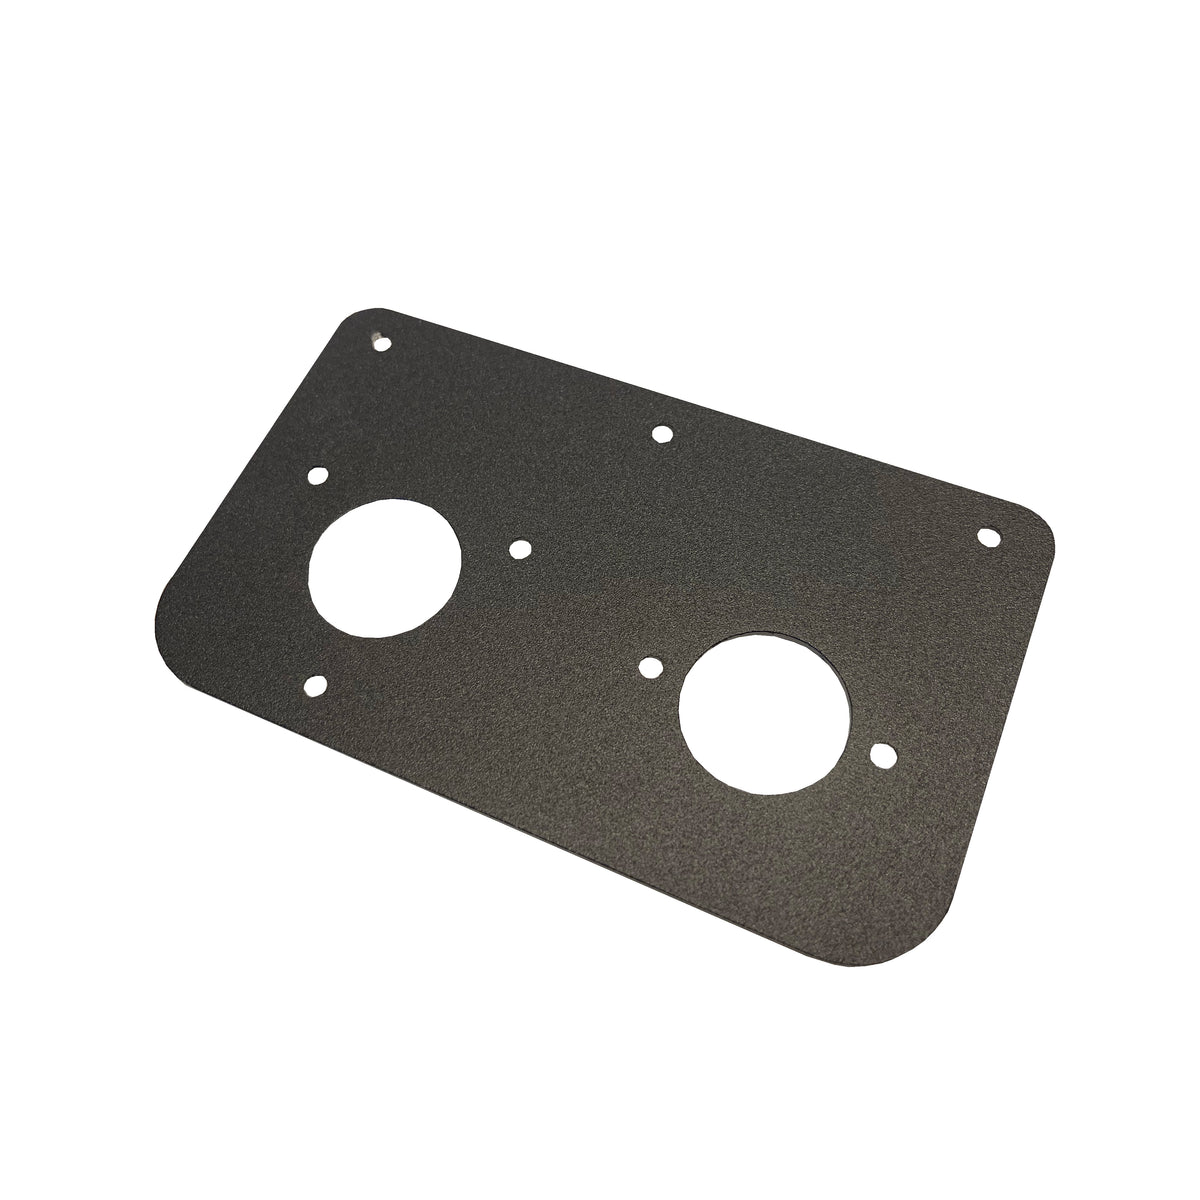 Water Inlet + Evacuation Port Mounting Plate